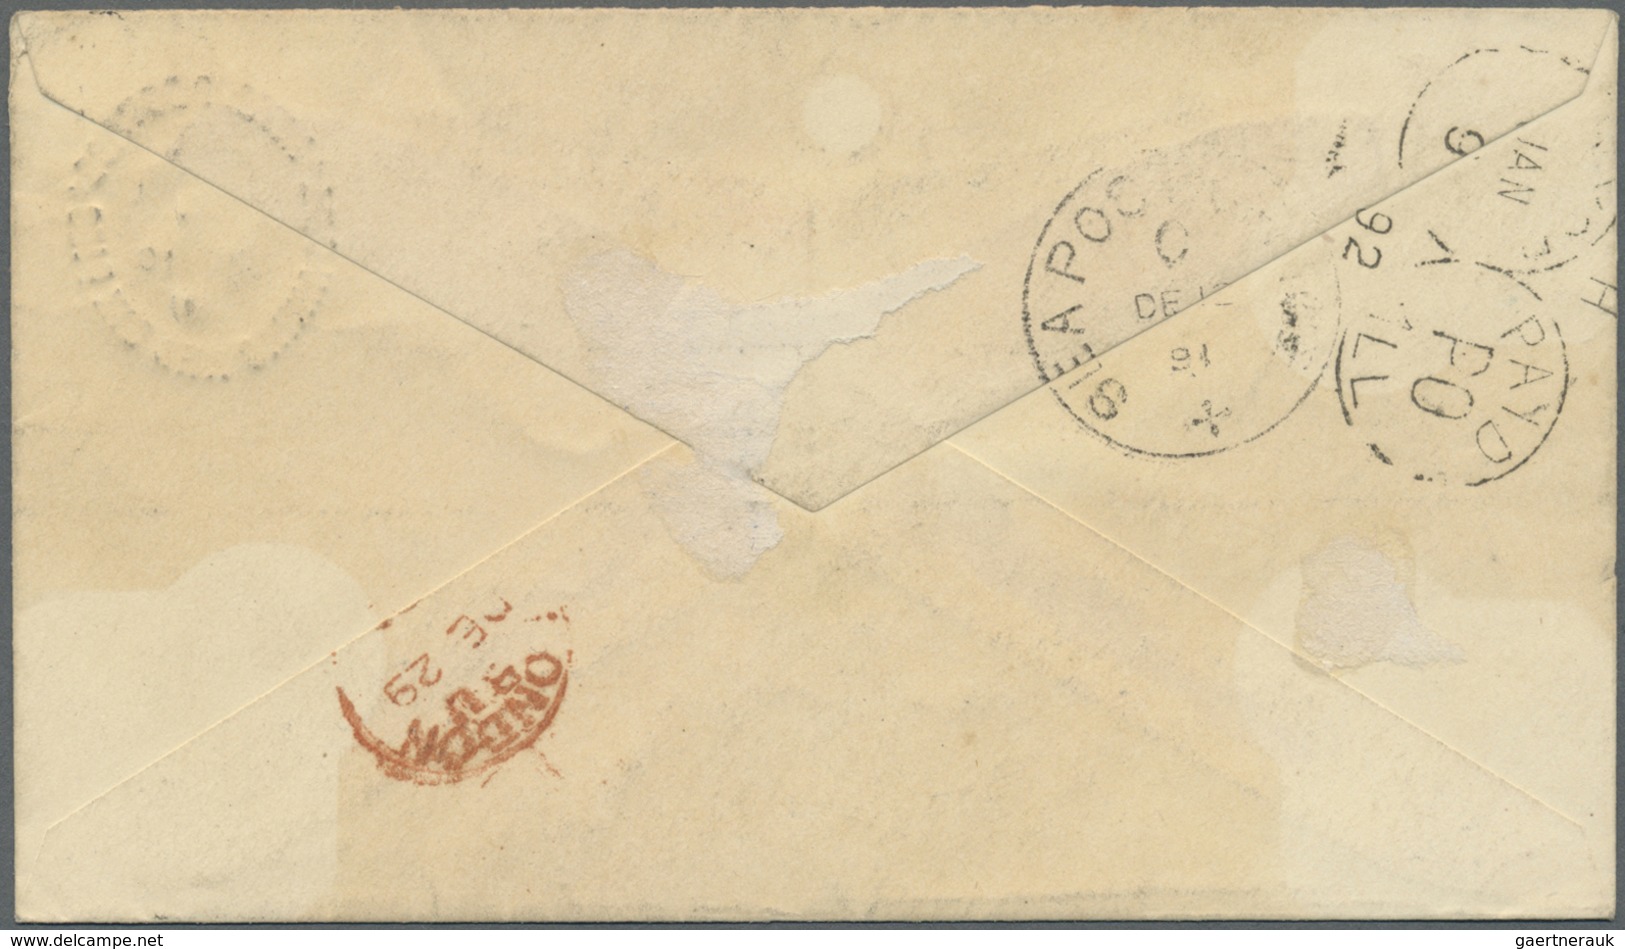 Br/GA Indien: 1887-1902: Four covers and postal stationery items from India to the U.S.A. and one cover (1